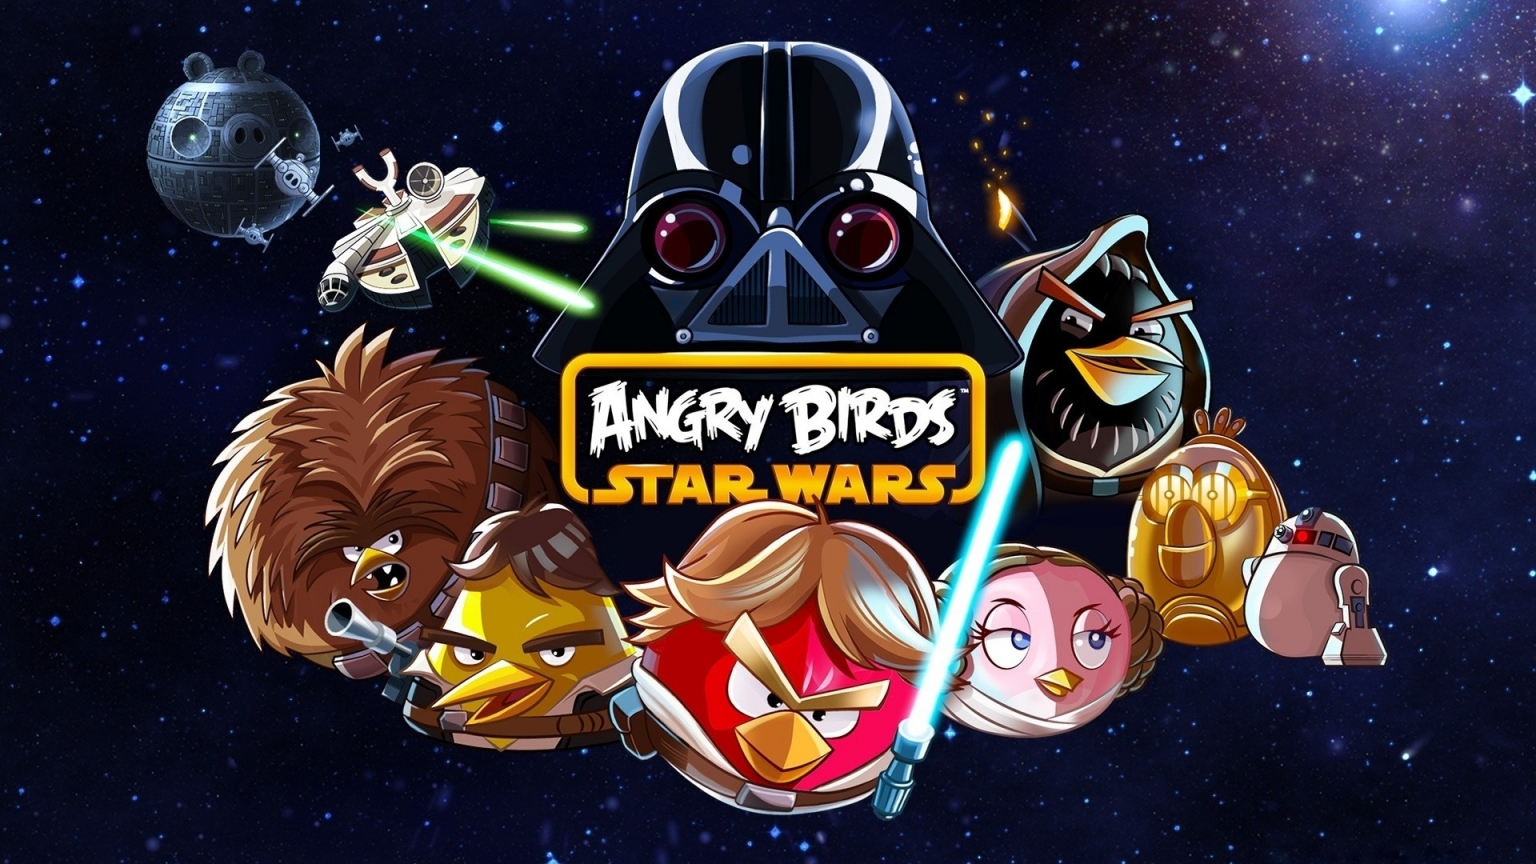 Angry Birds Star Wars for 1536 x 864 HDTV resolution